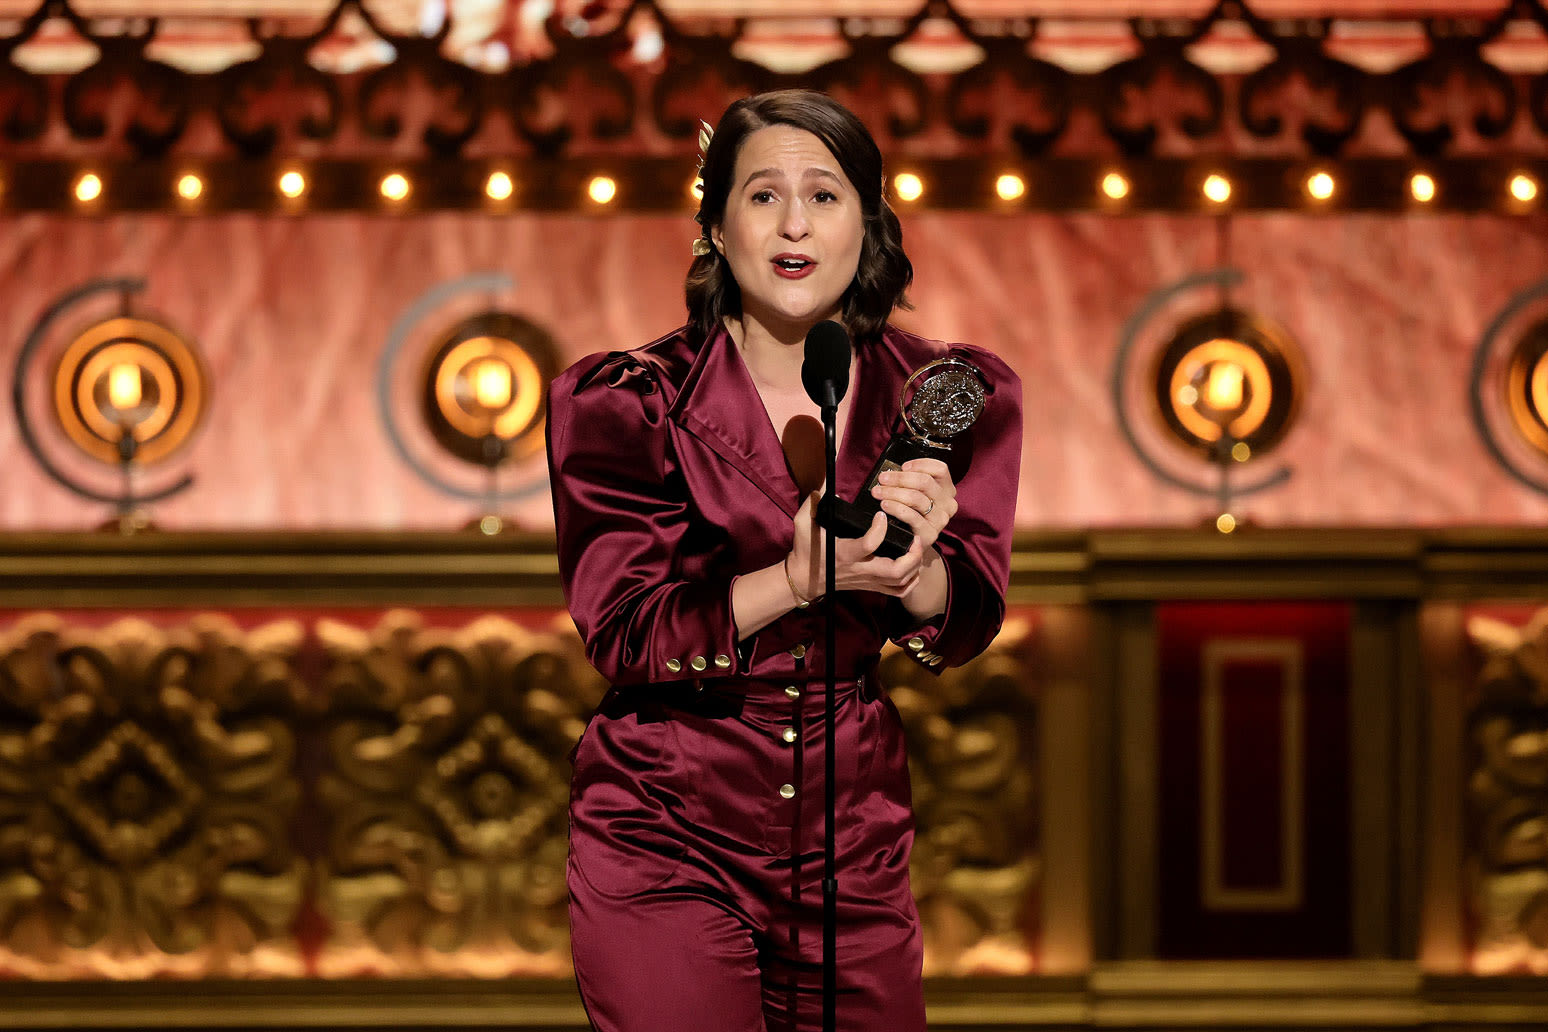 Tony Winner Shaina Taub on Her Two Awards for ‘Suffs’ and Why Broadway ‘Loves’ Hillary Clinton